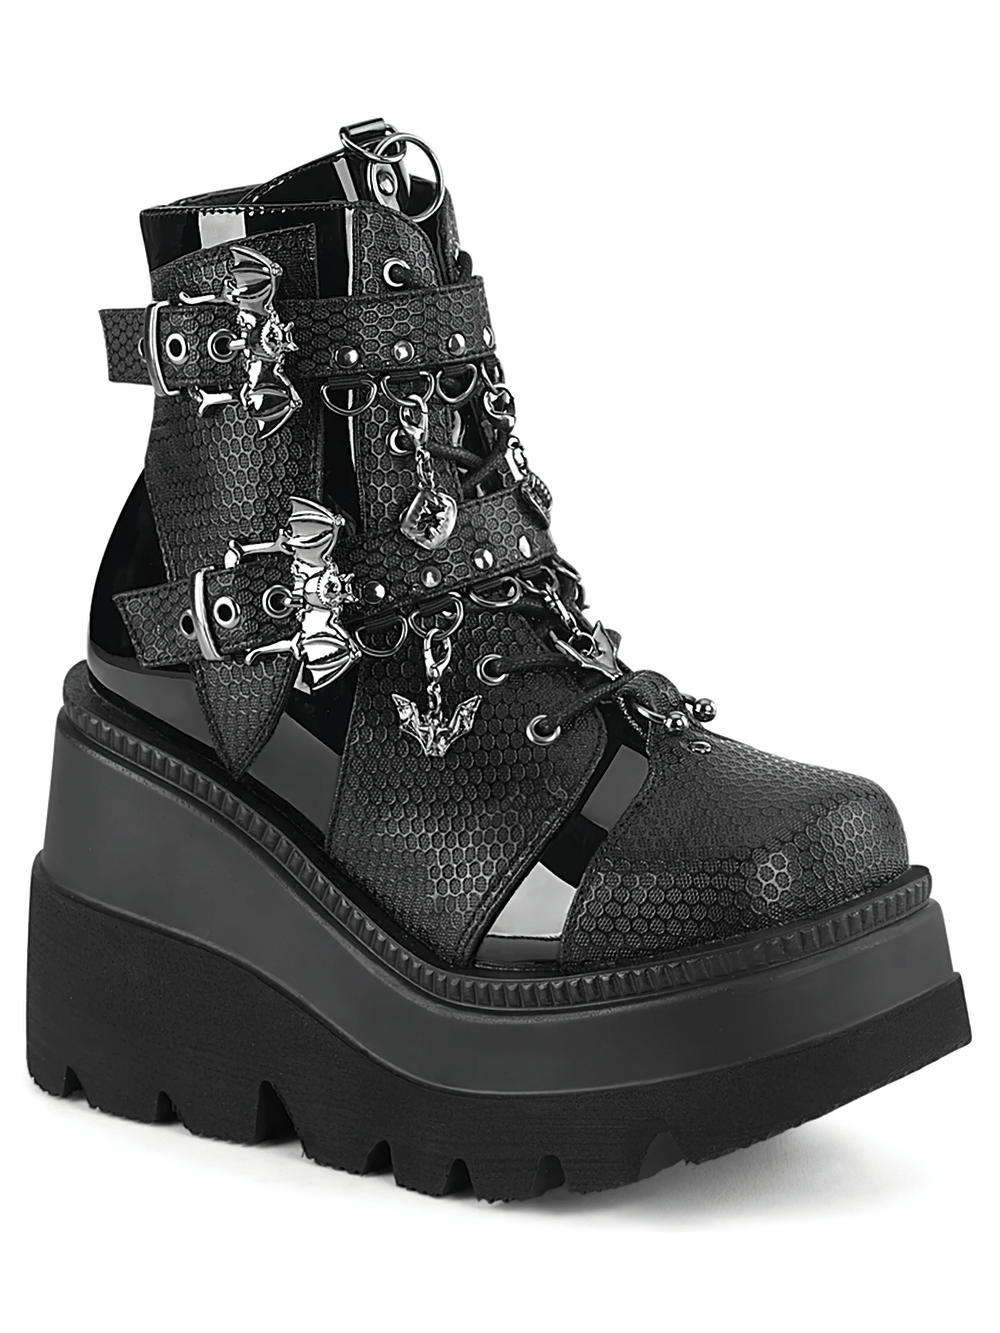 DEMONIA Chained Platform Boots with Bat Buckle Details